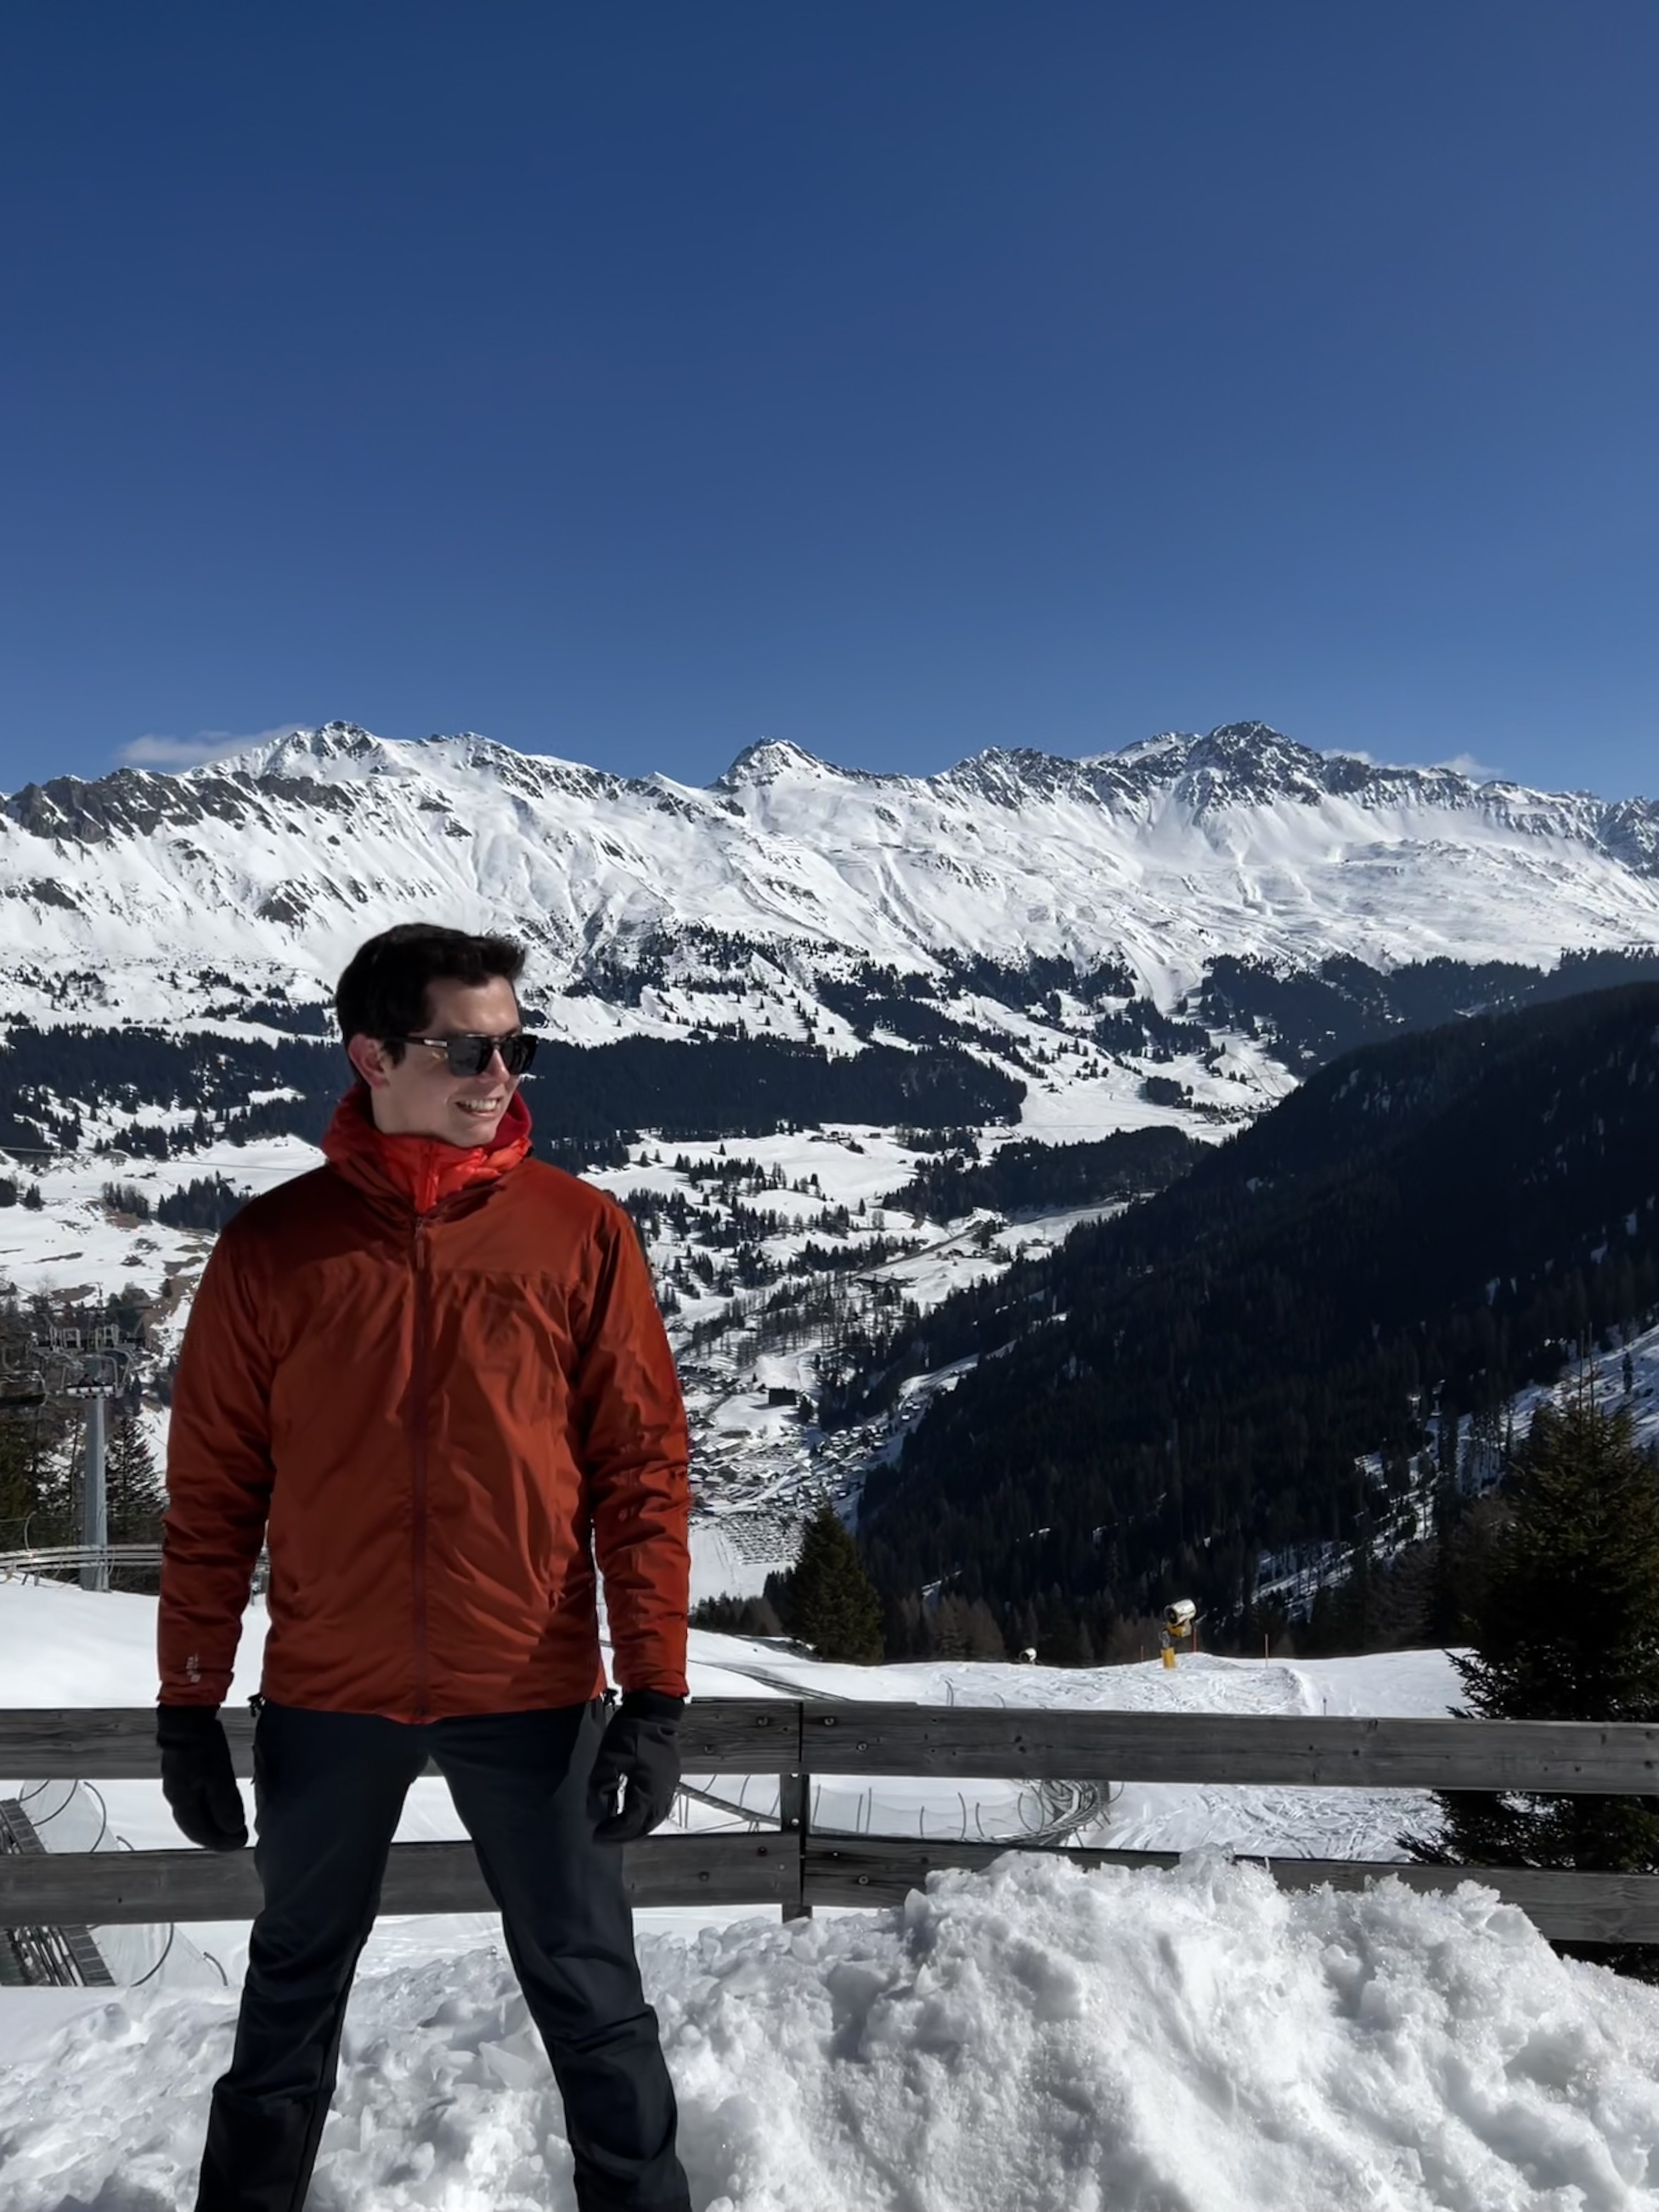 Student standing in front of snowy mountains (the Swiss Alps)